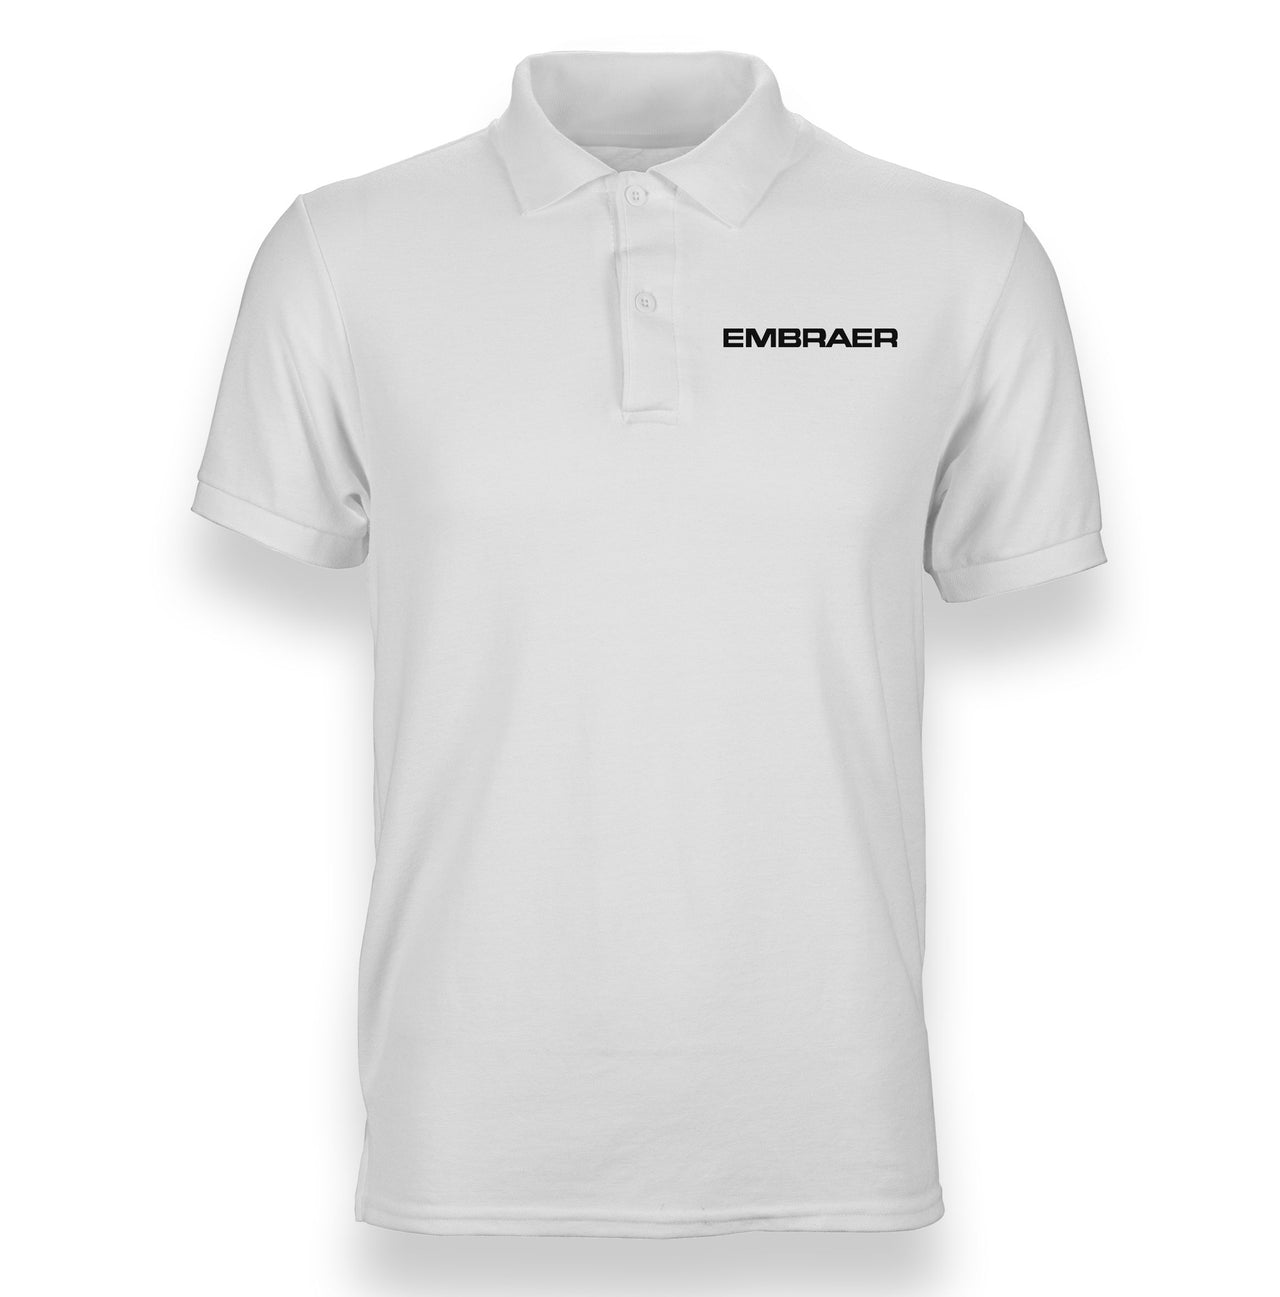 Embraer & Text Designed Polo T-Shirts